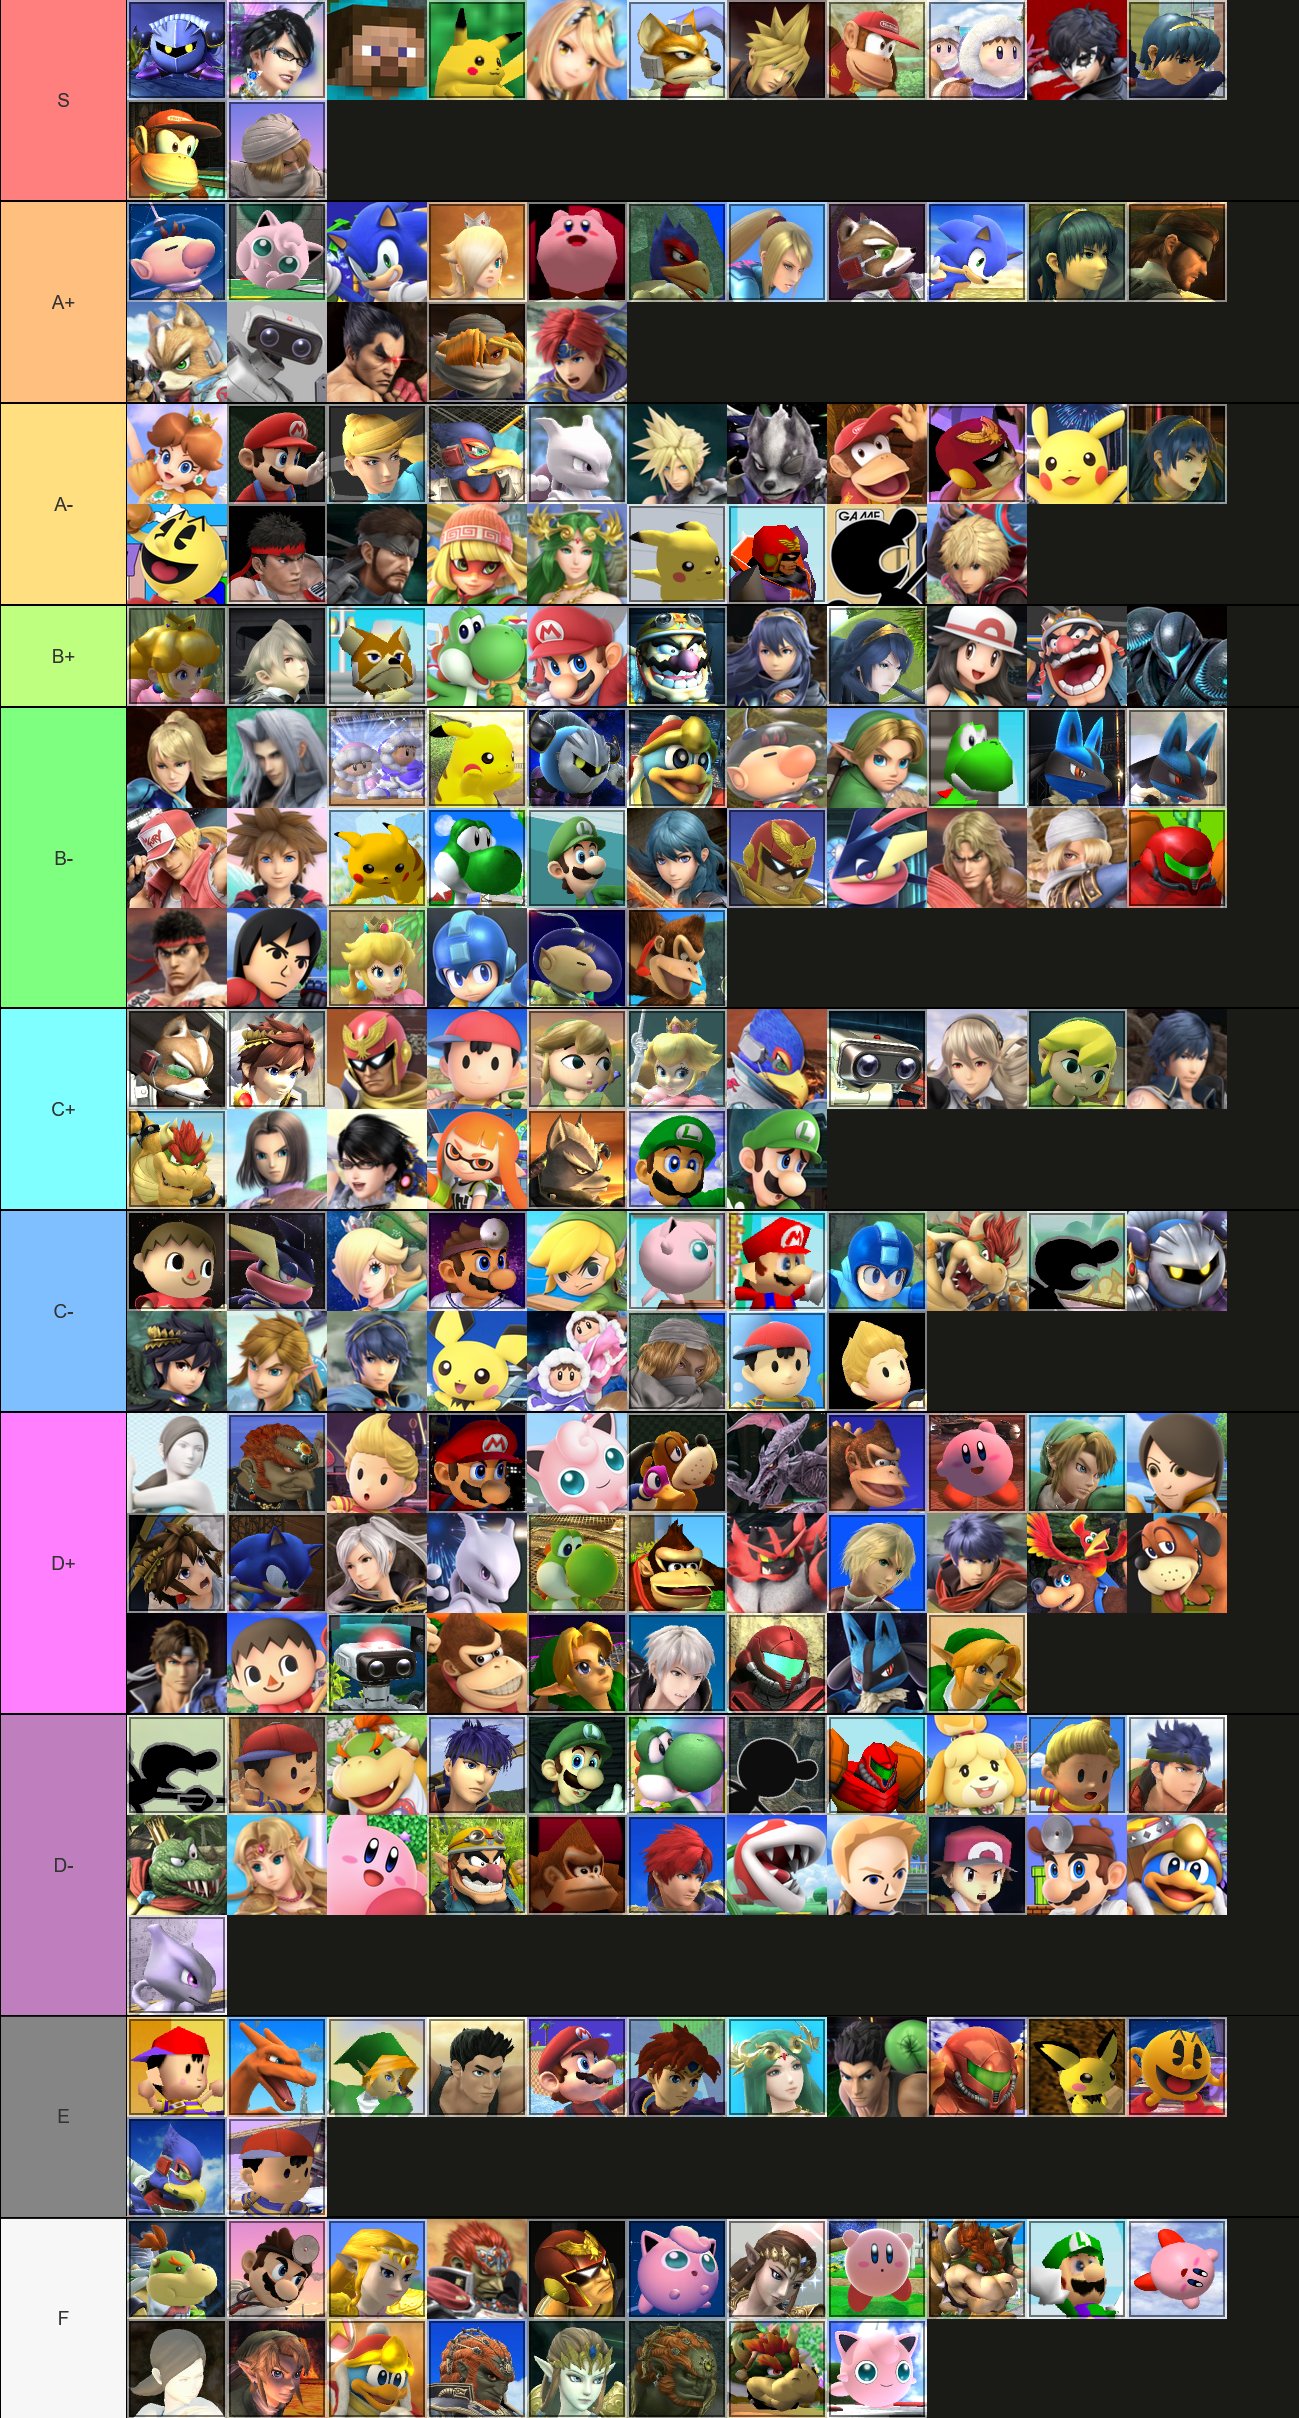 IcyK on Twitter "the ultimate smash bros tier list made by combining